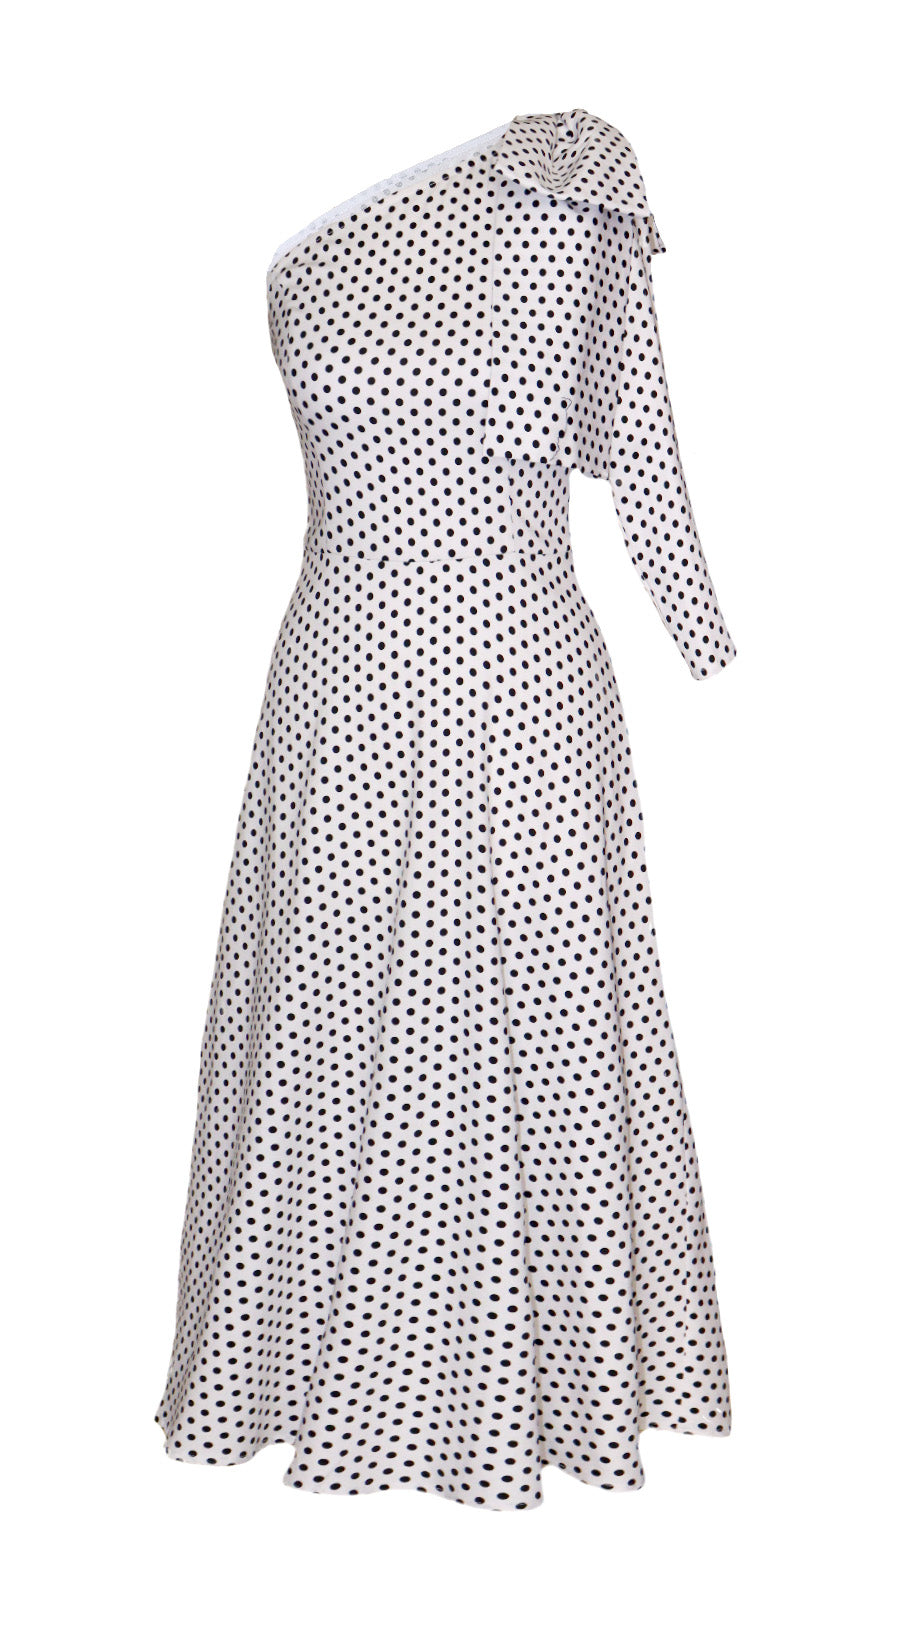 One-shoulder polka dot dress with a bow